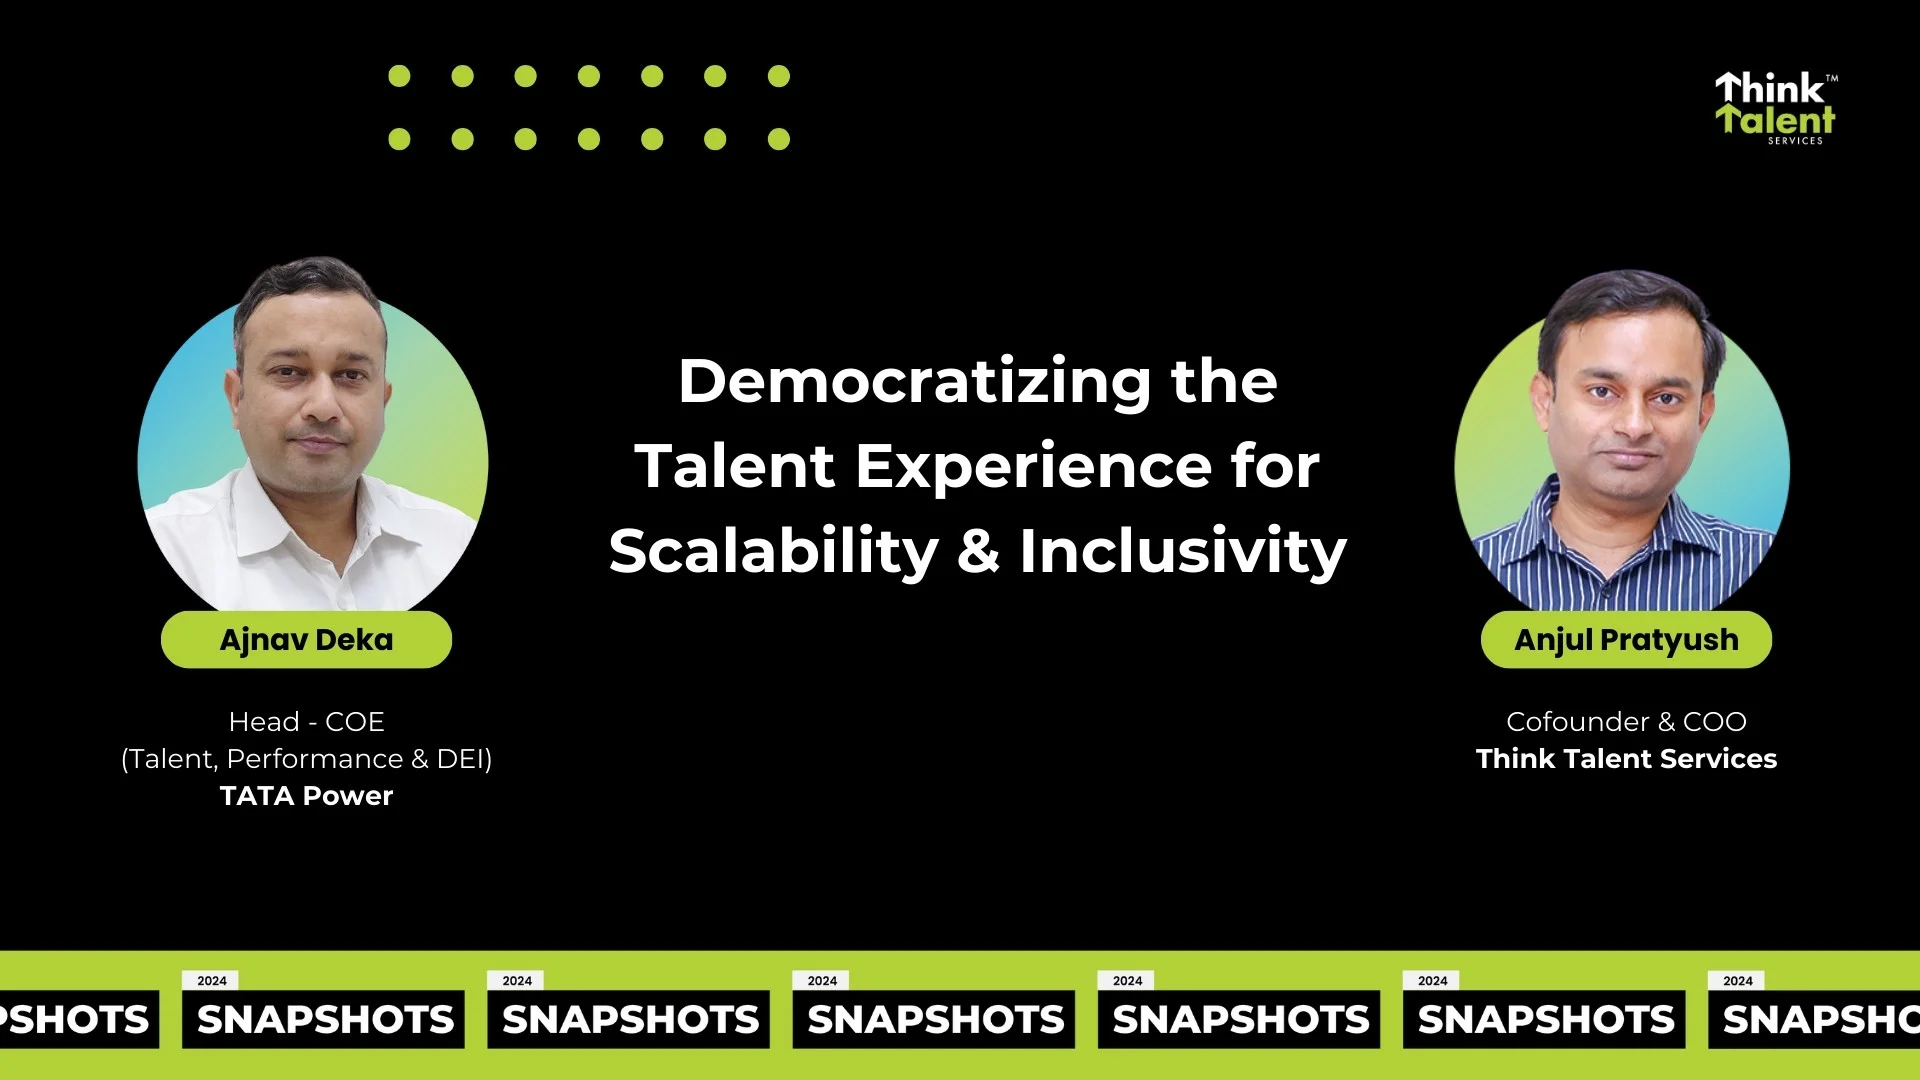 Democratizing the Talent Experience for Scalability & Inclusivity